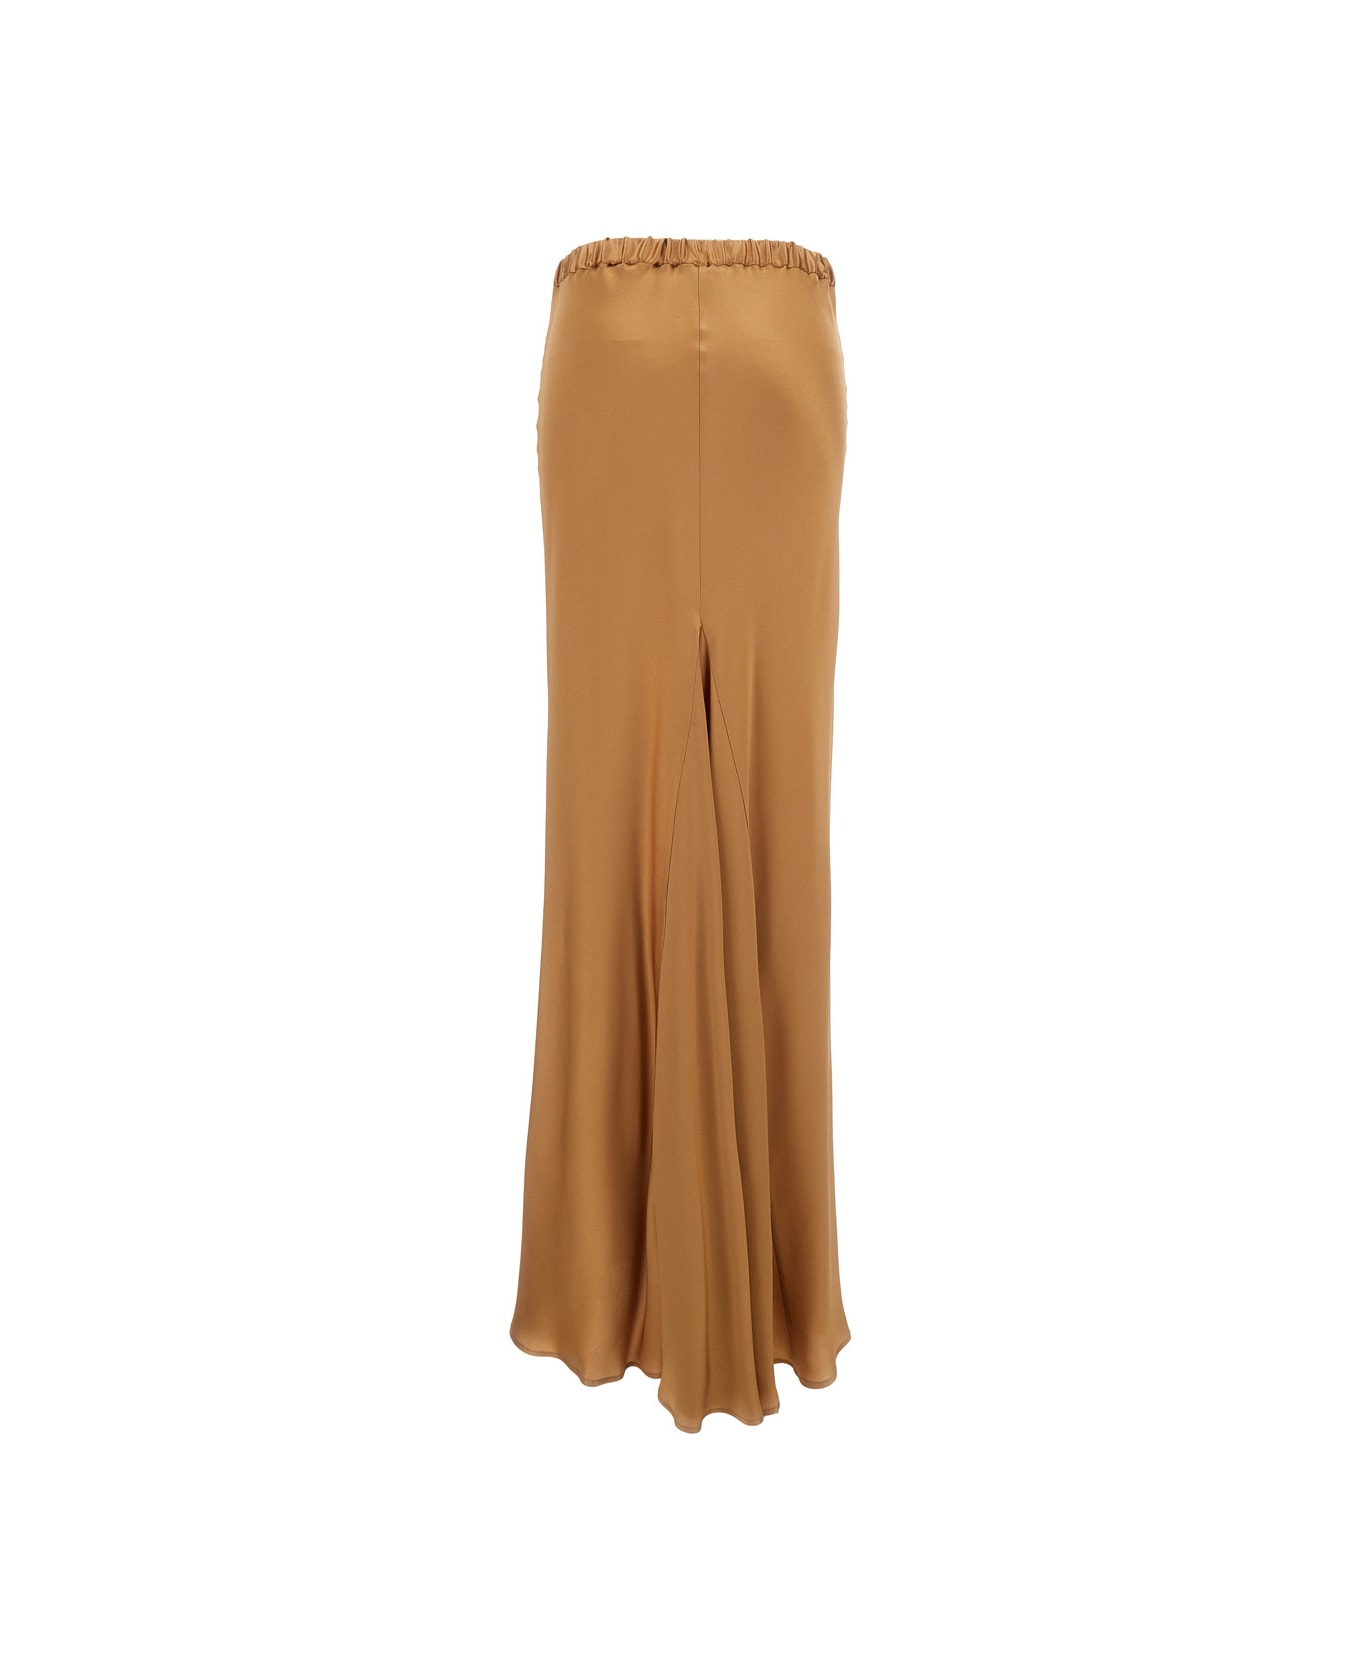 Antonelli Maxi Brown Skirt With Split At The Back In Acetate Blend Woman - Brown スカート